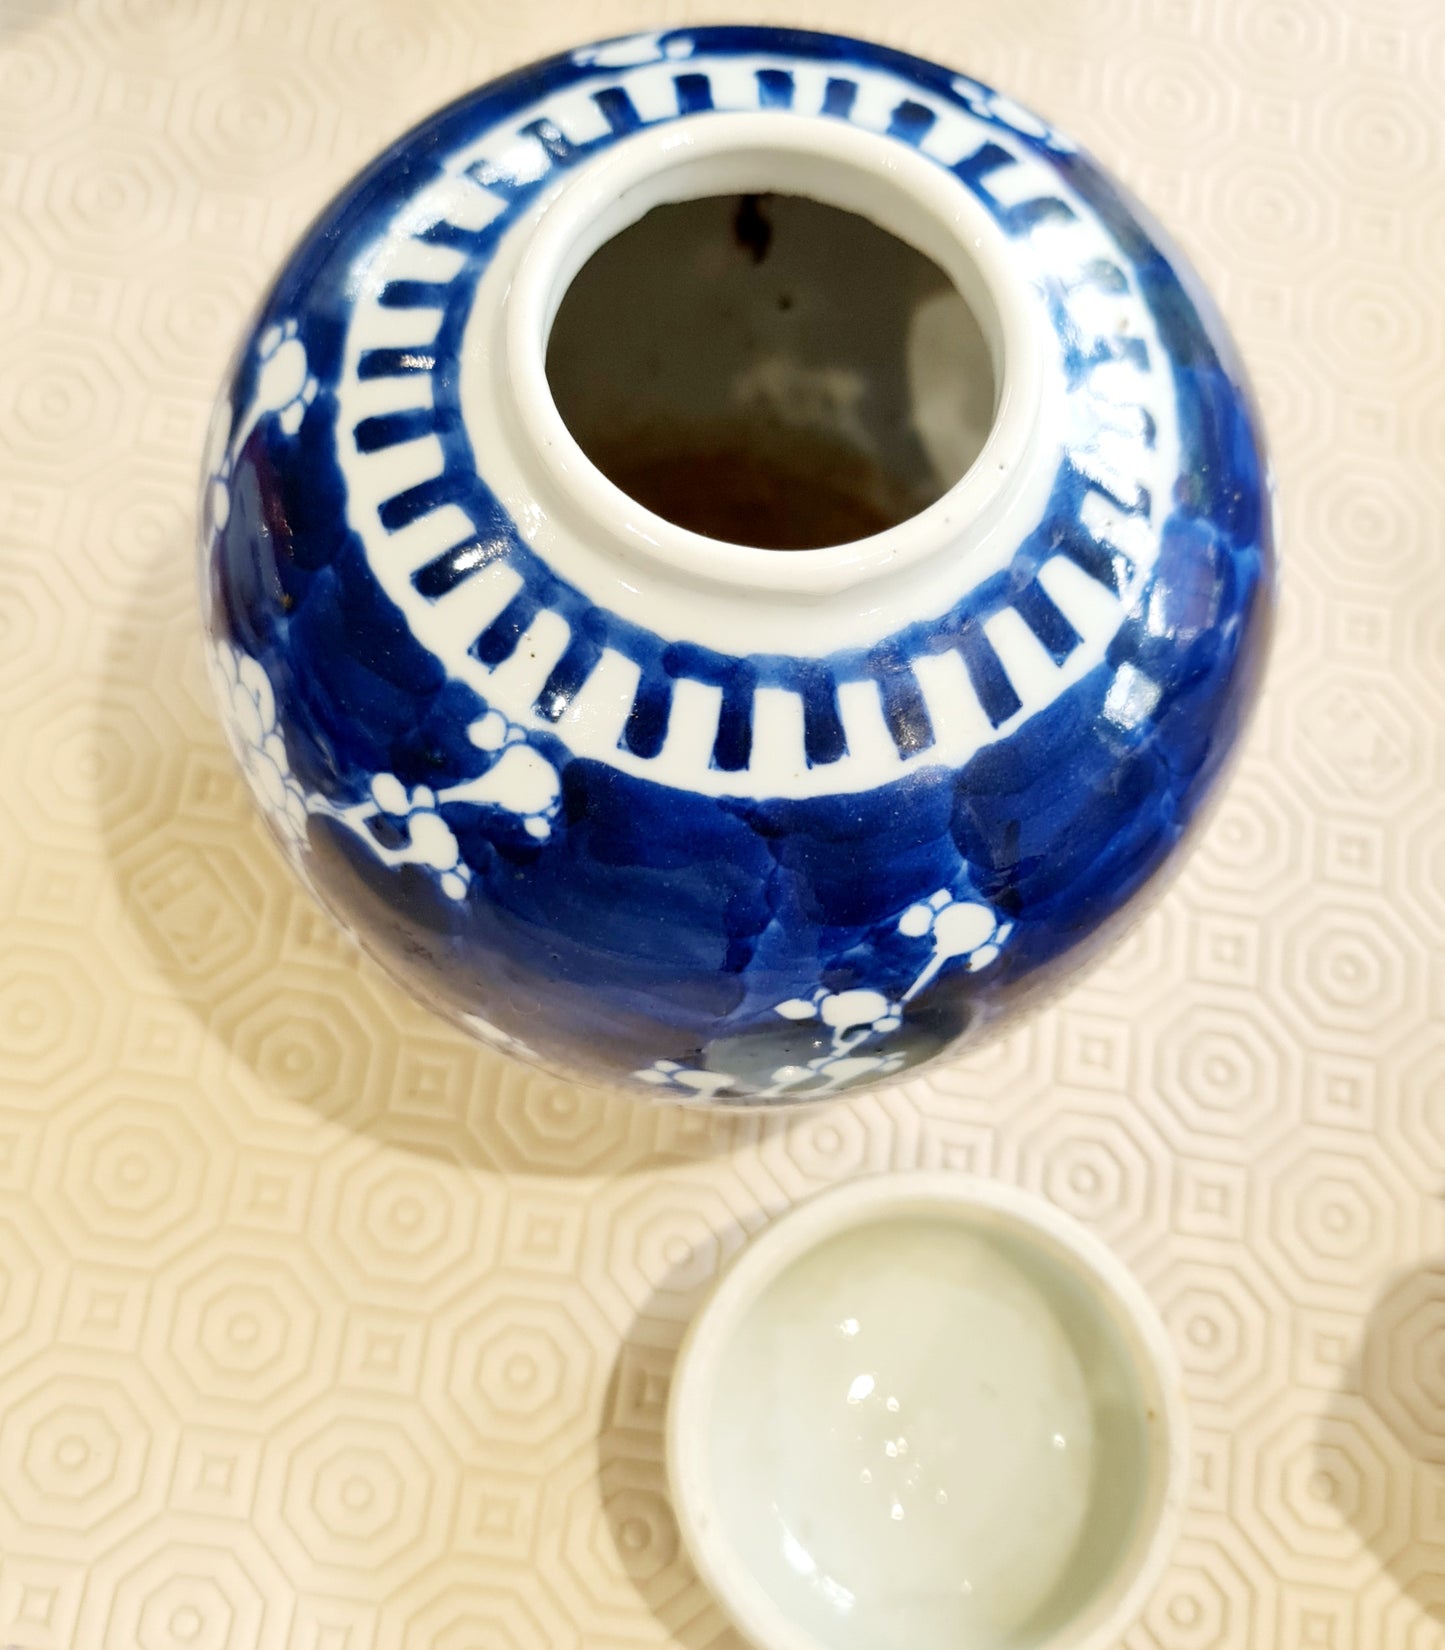 19th century Chinese blue and white porcelain prunus pattern ginger jar and cover, 19th century, height 21cm, diameter 16.5cm.